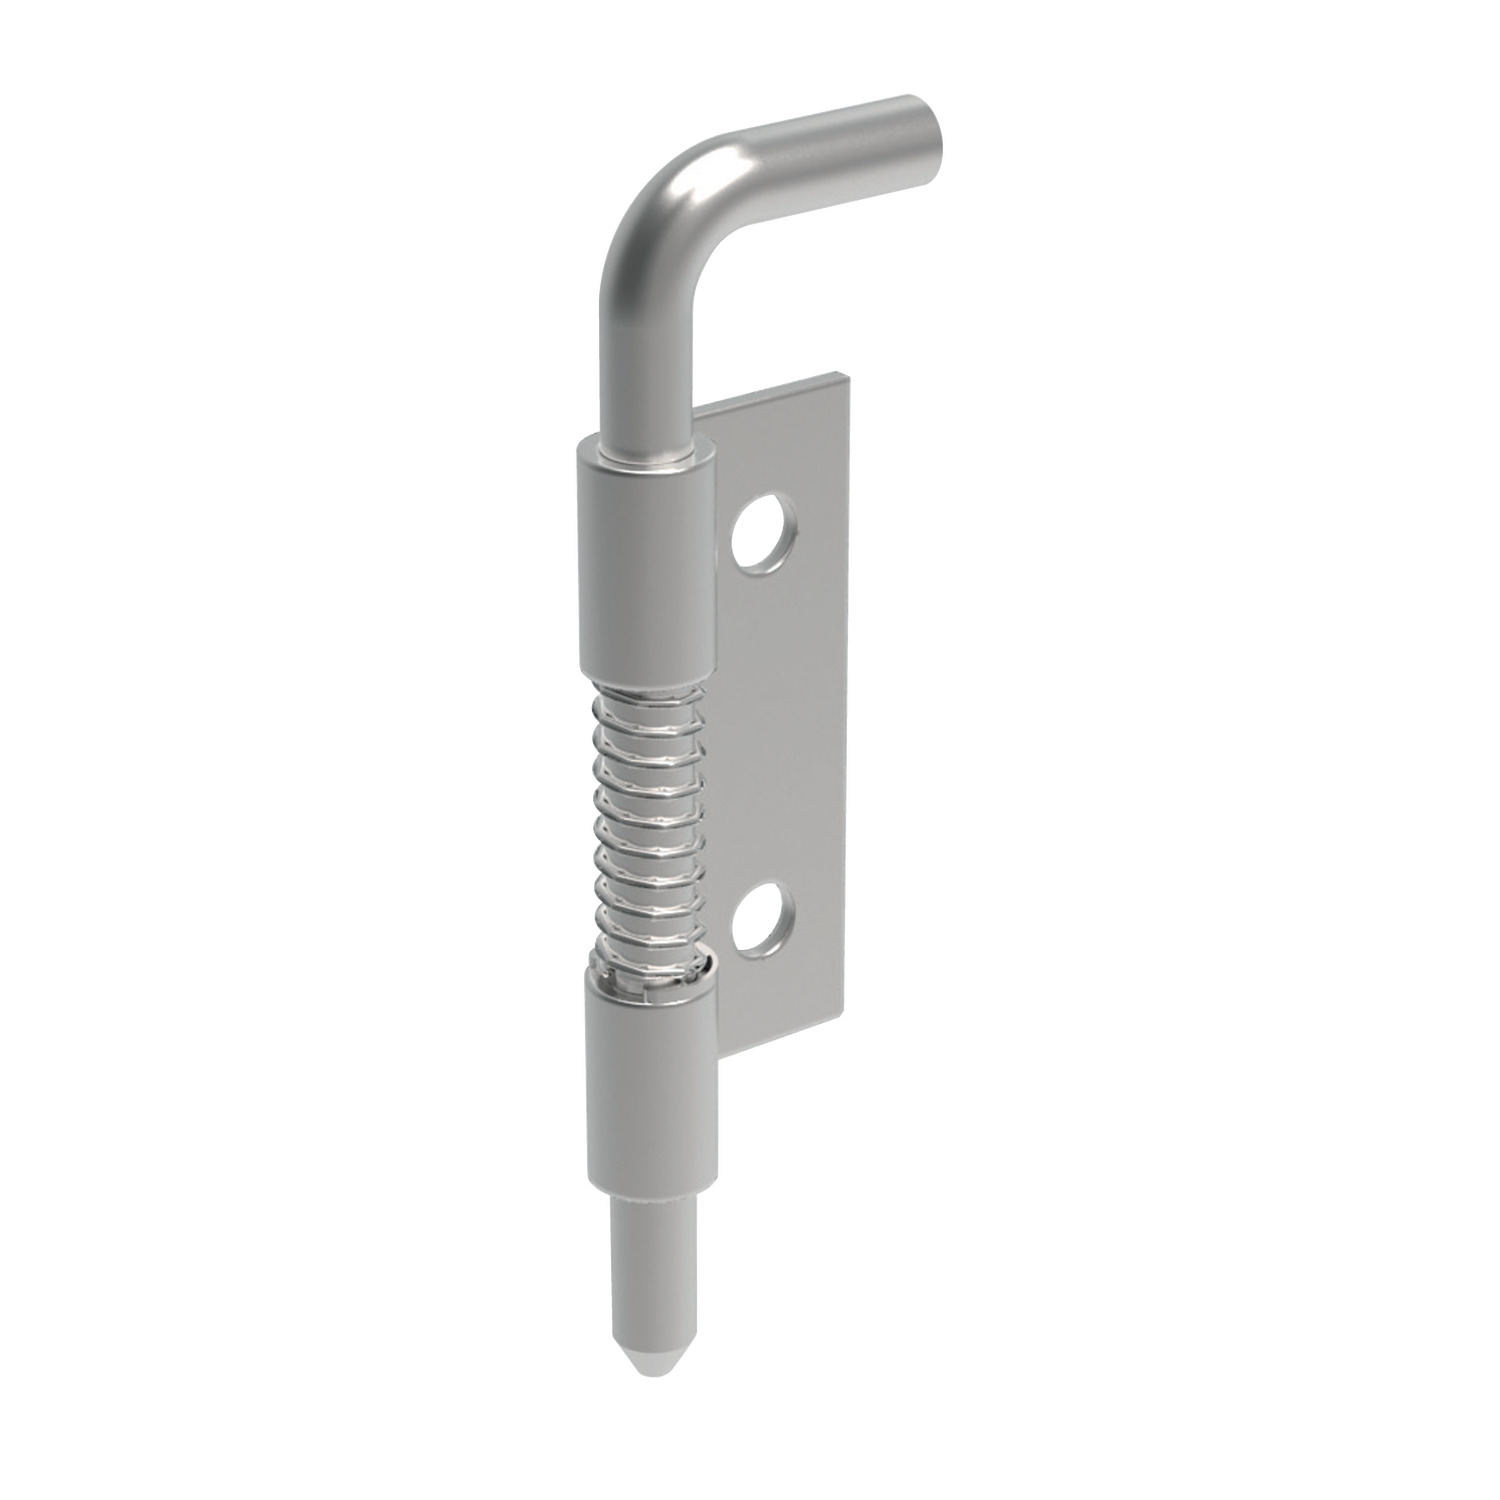 S2205.AW0032 End Mount Concealed Pivot Hinge screw or weld-on